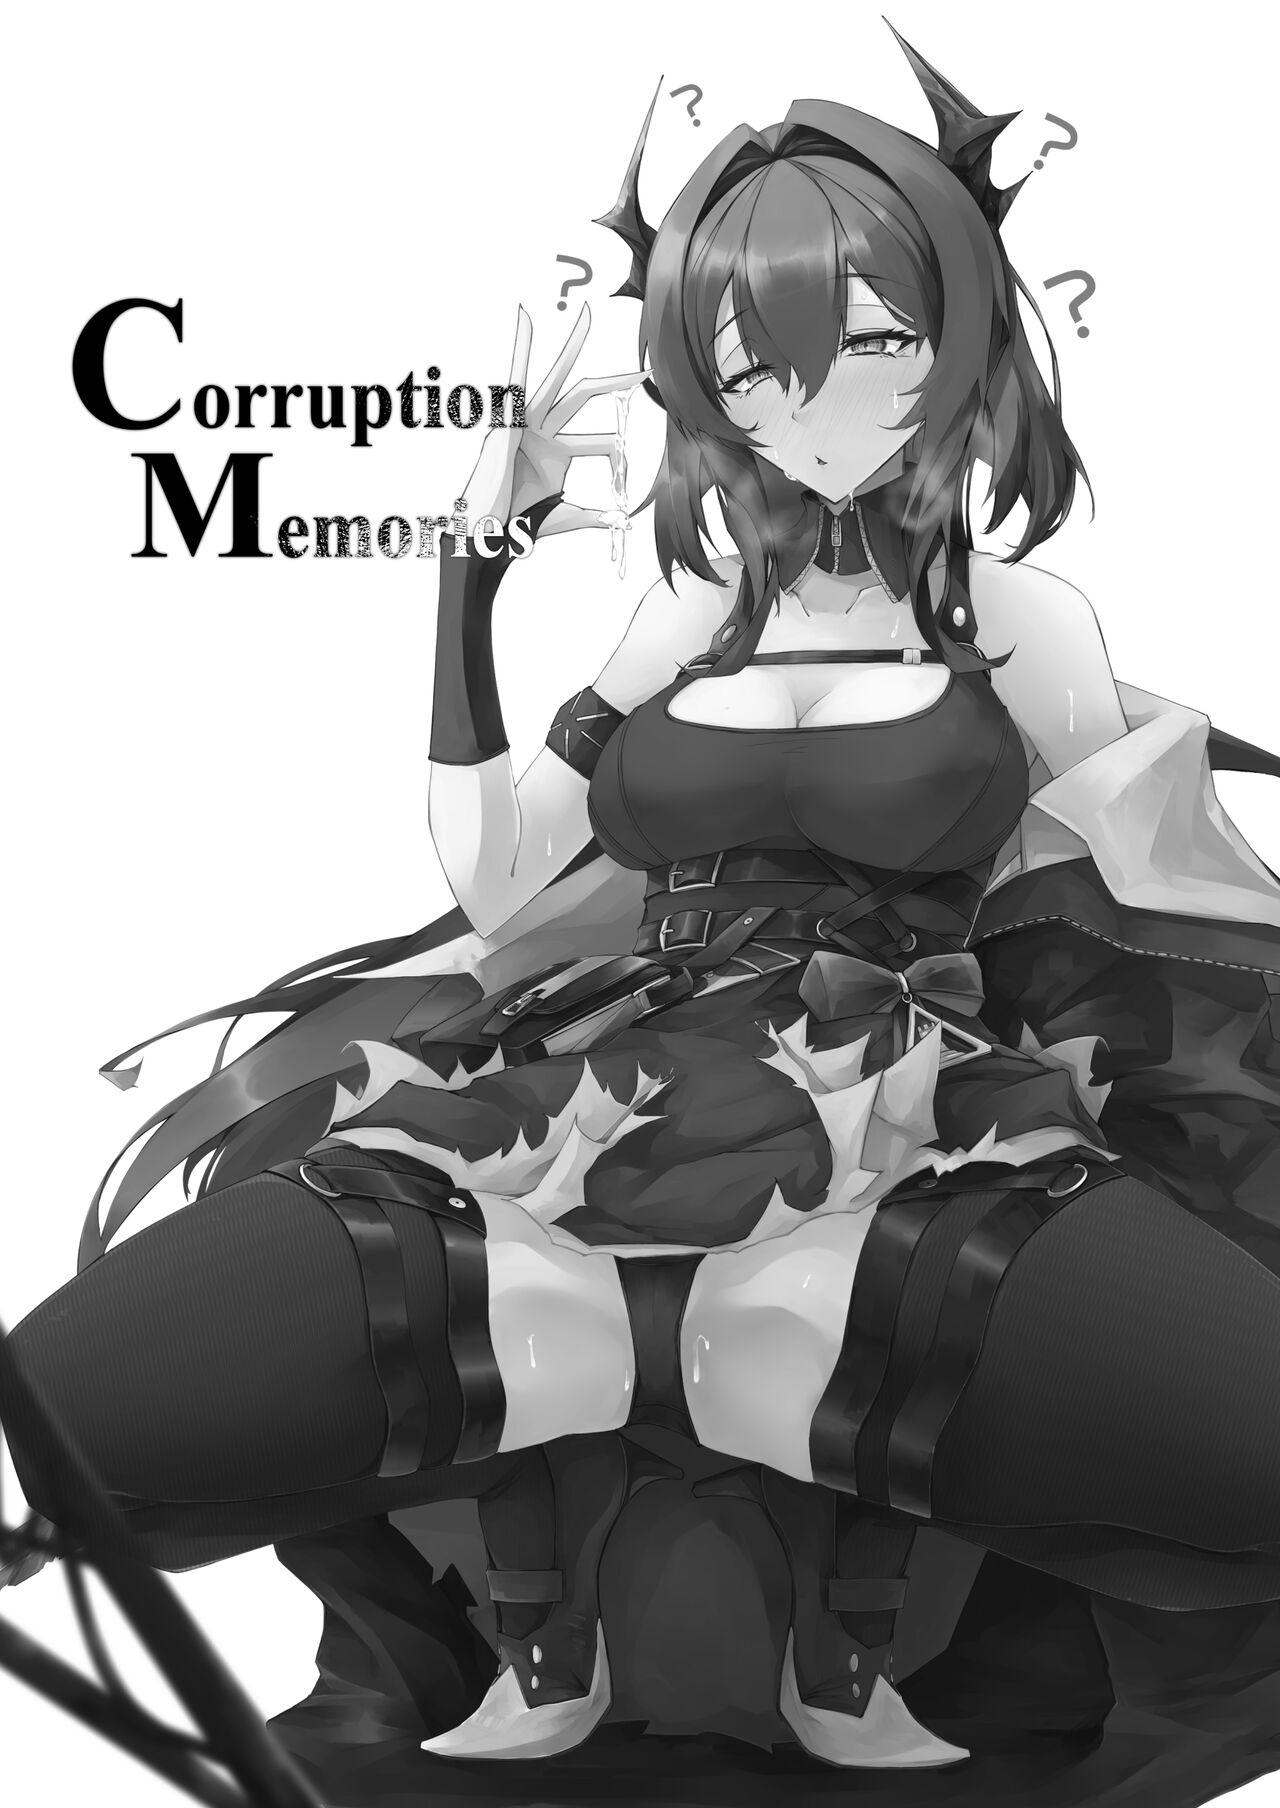 Cut Corruption Memories - Arknights Domina - Picture 2